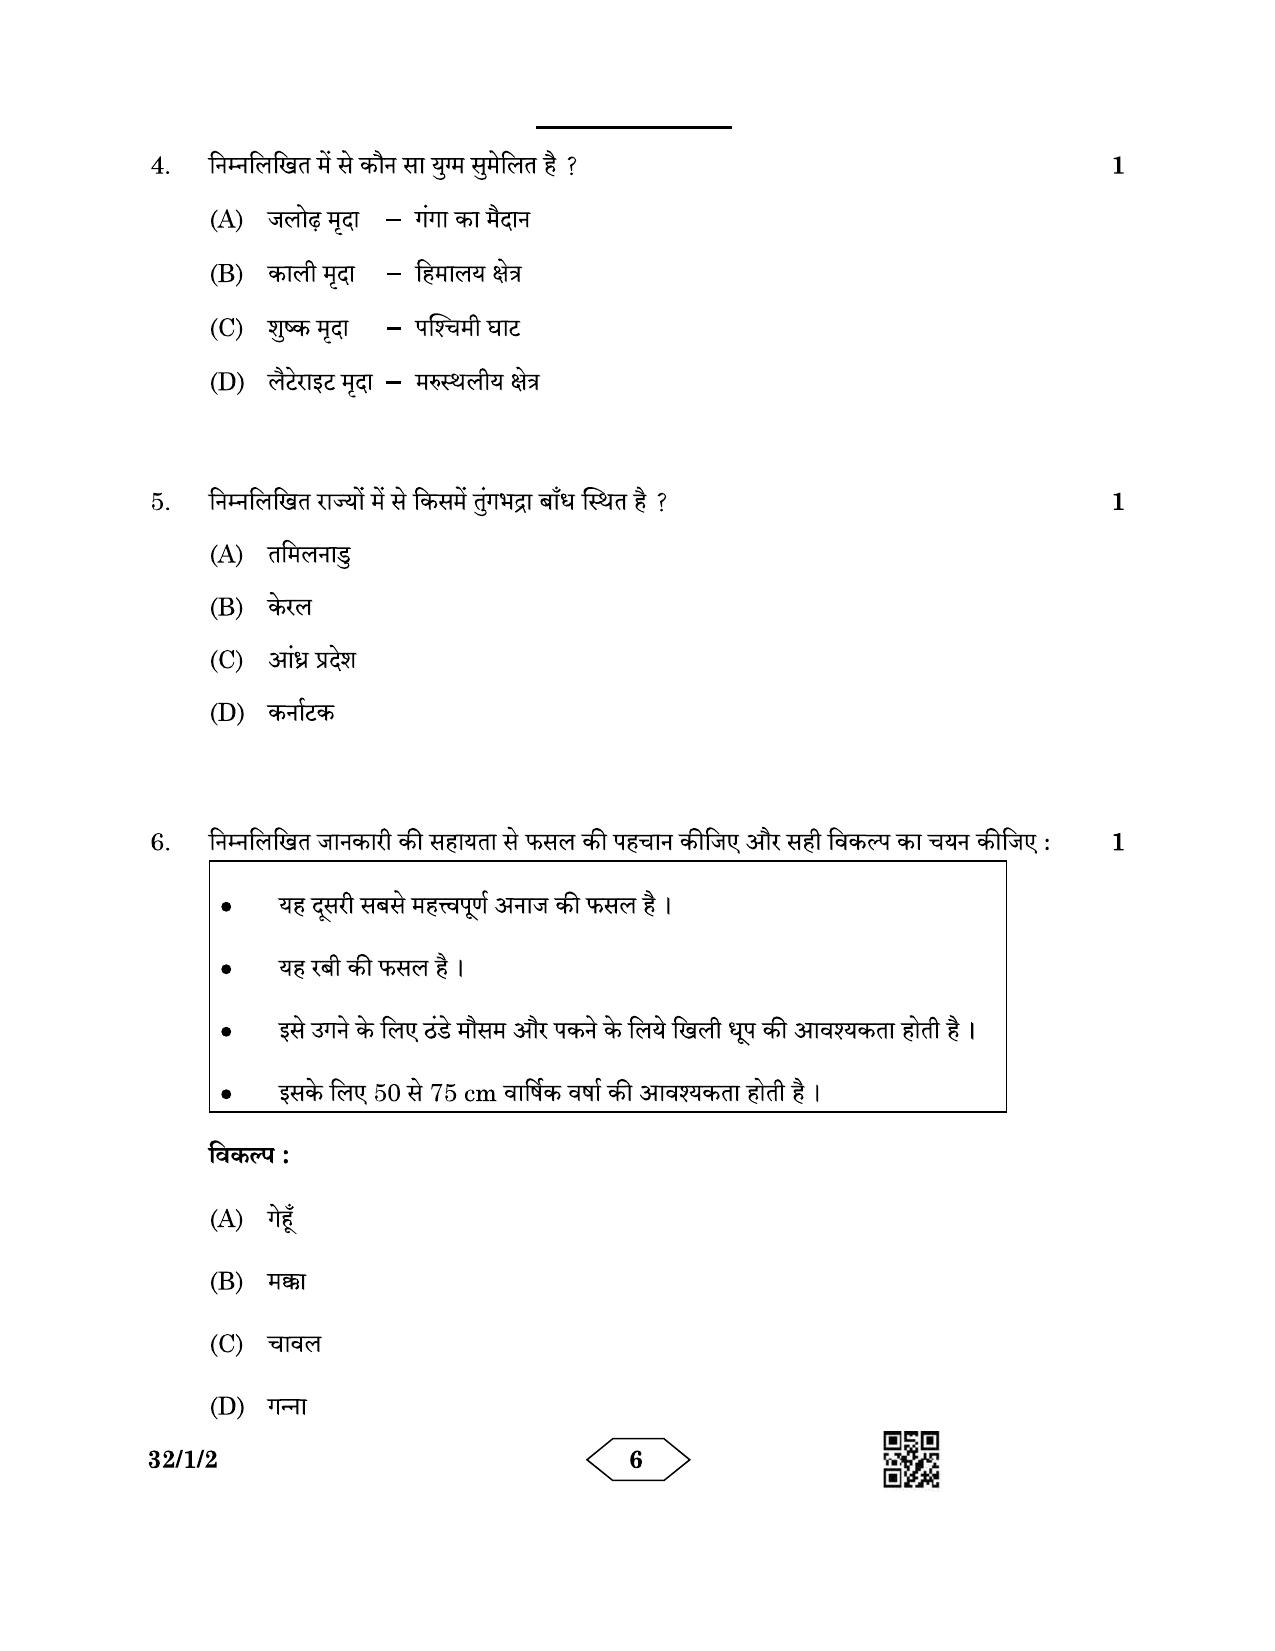 CBSE Class 10 32-1-2 Social Science 2023 Question Paper - Page 6